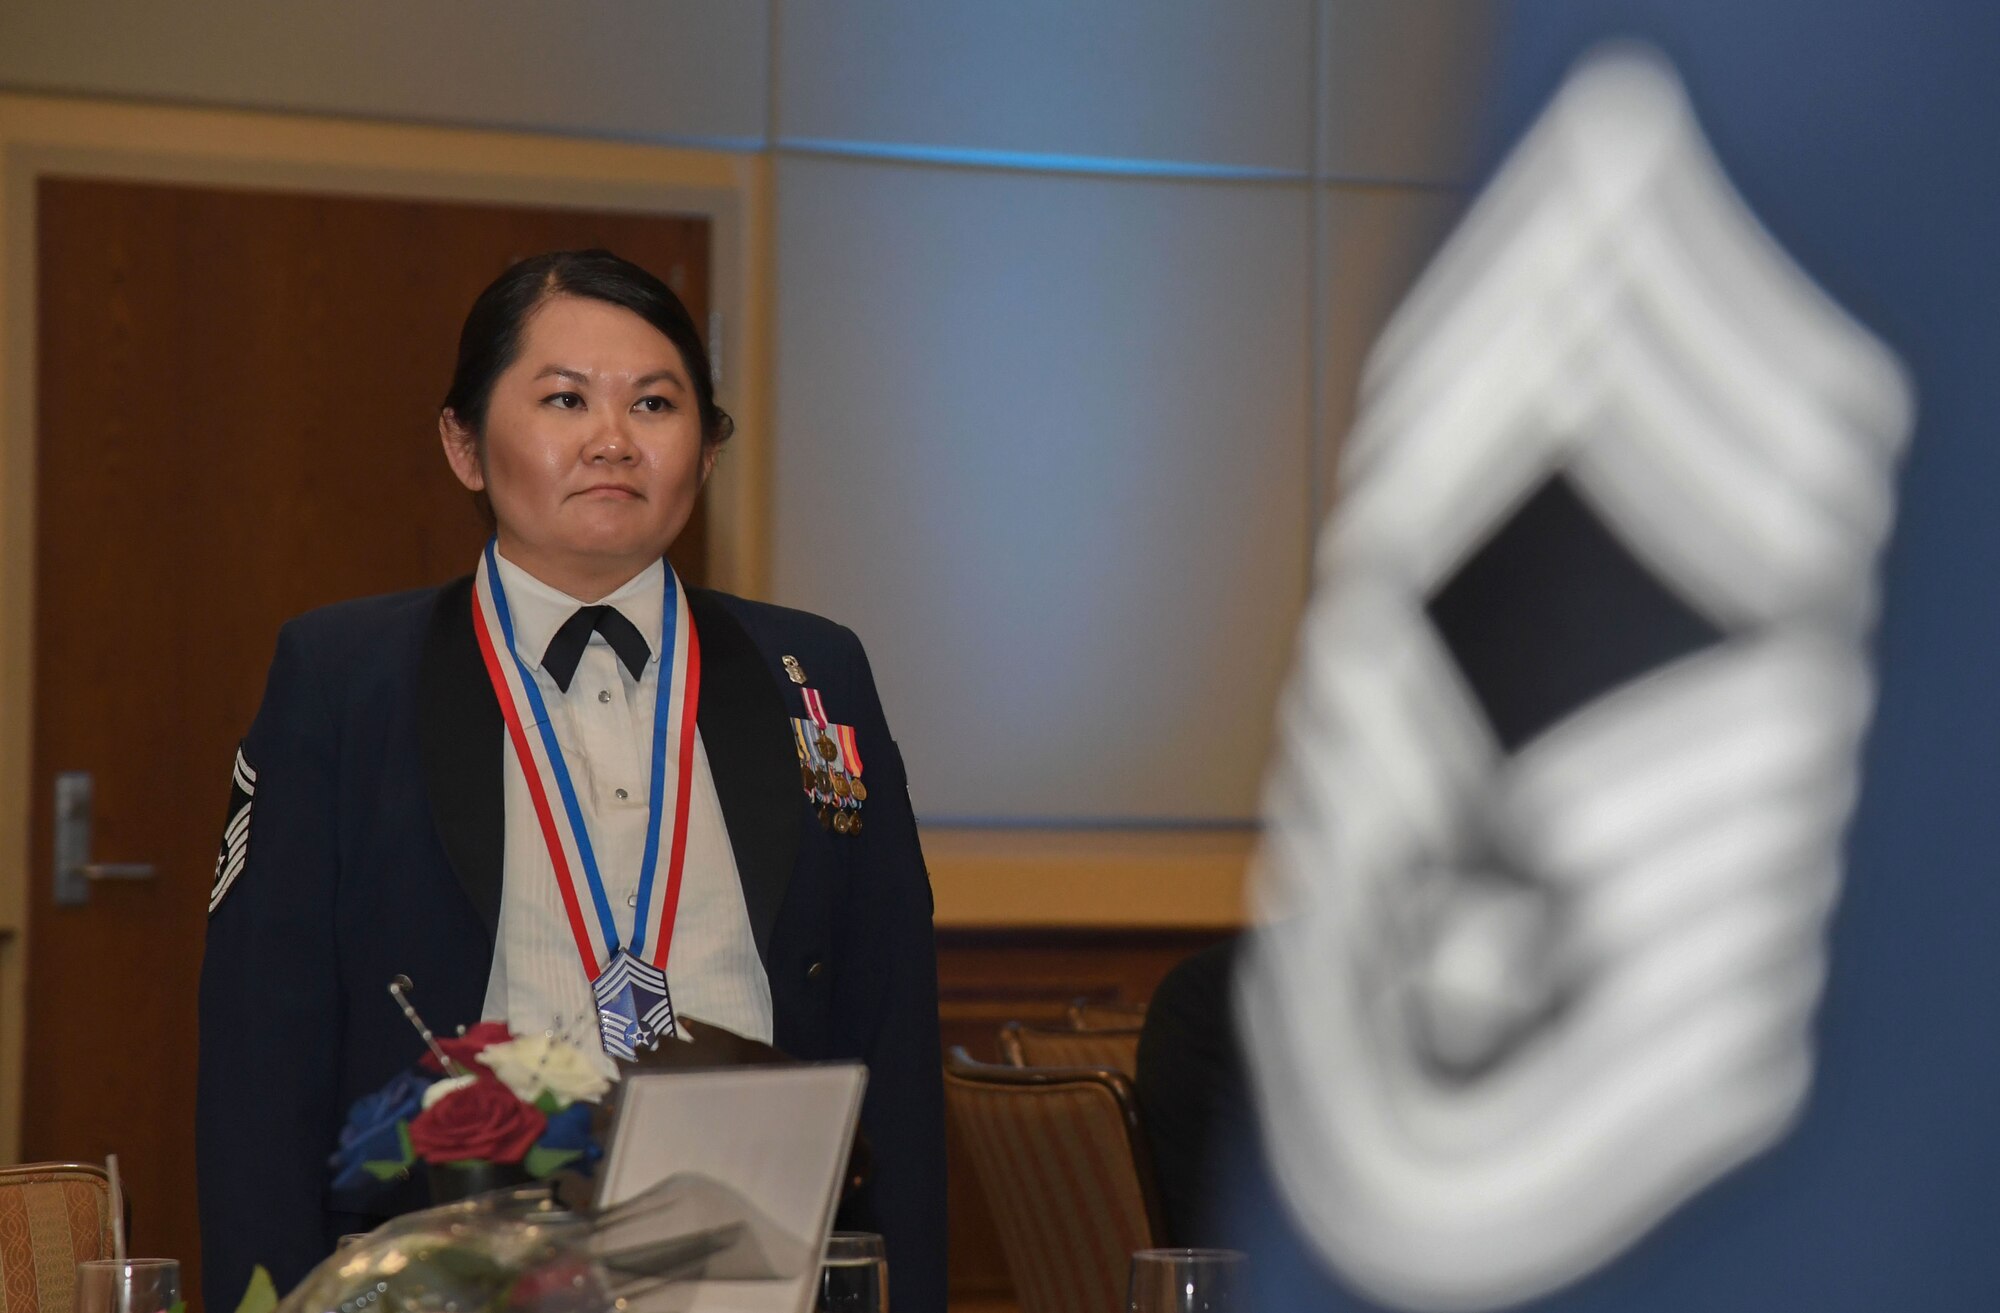 U.S. Air Force Senior Master Sgt. MyTien Pham, 81st Medical Support Squadron senior enlisted leader, stands at attention during the Chief Master Sergeant Recognition Ceremony inside the Bay Breeze Event Center at Keesler Air Force Base, Mississippi, April 20, 2023.